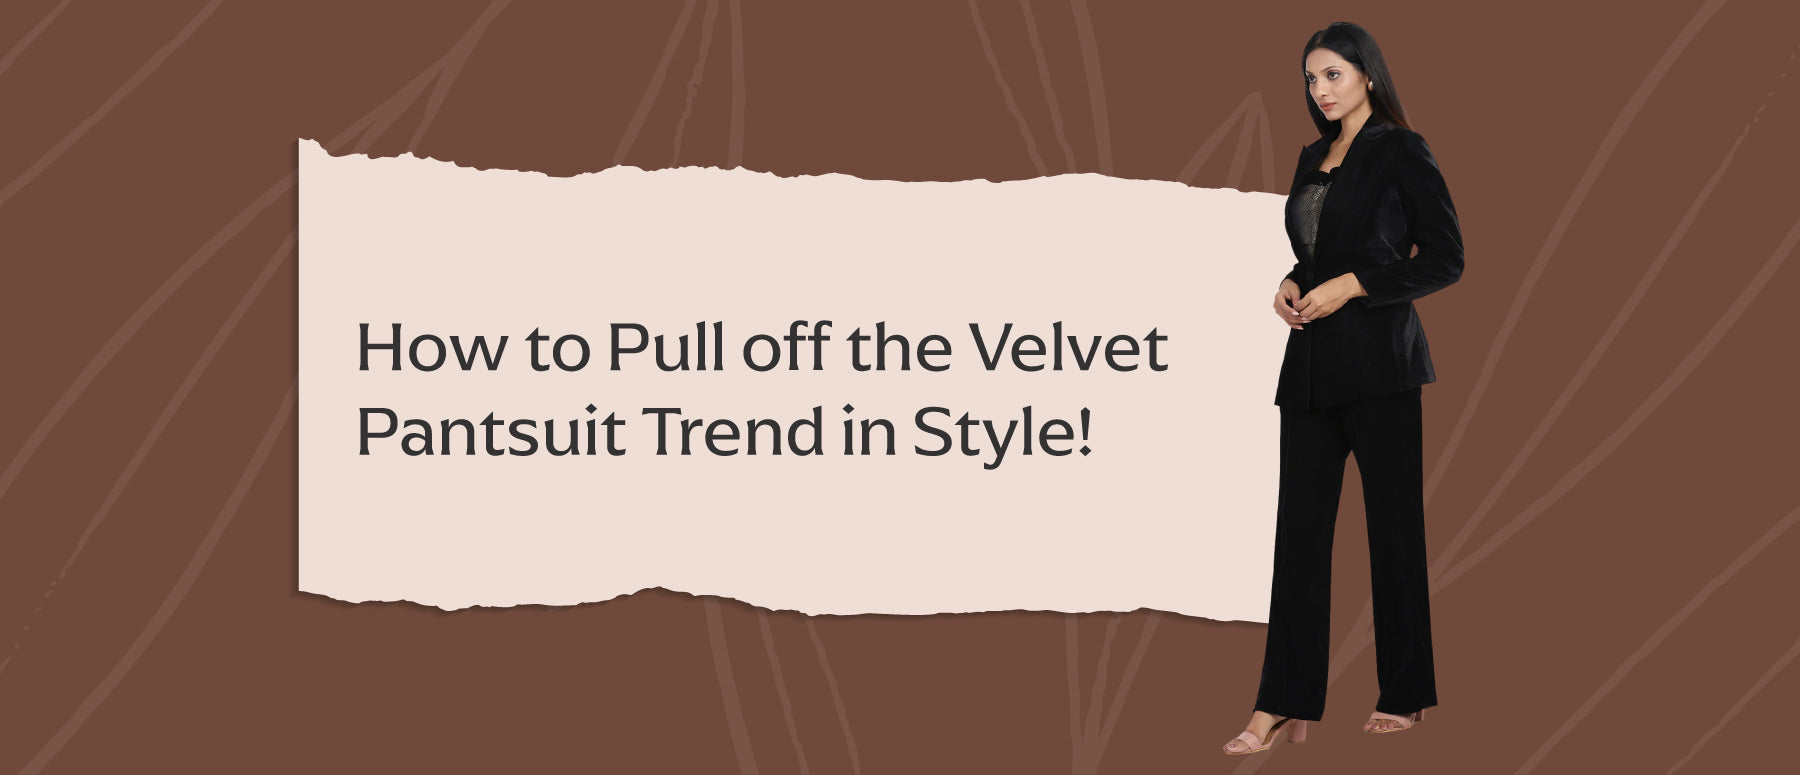 How to Pull off the Velvet Pantsuit Trend in Style!